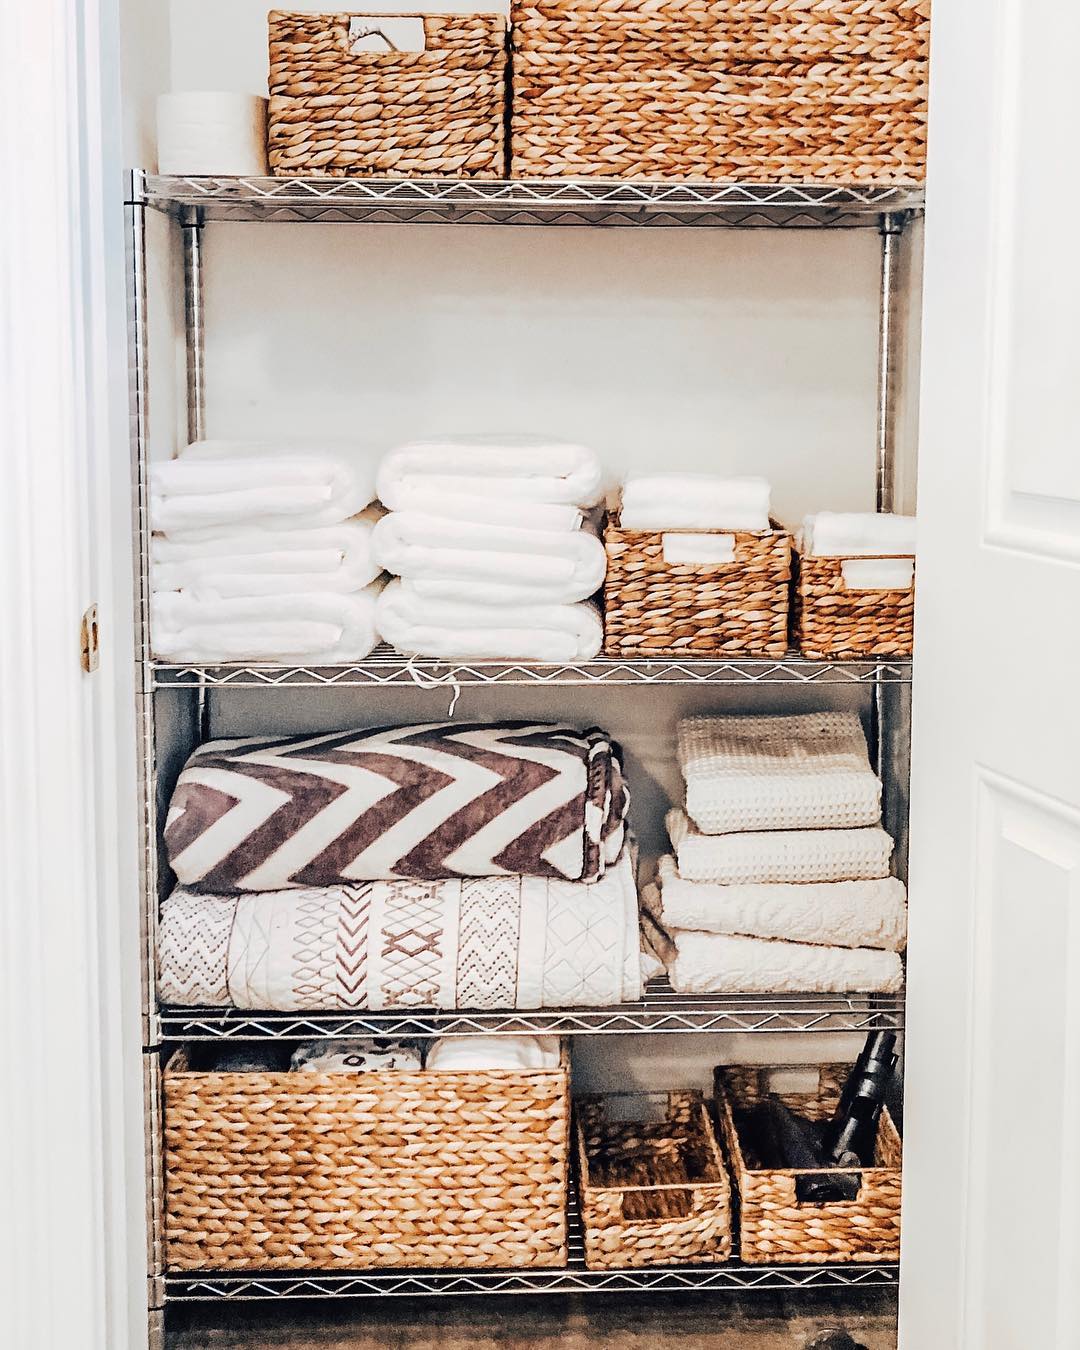 Photos of Linen Closets to Inspire You to Finally Organize Yours ...